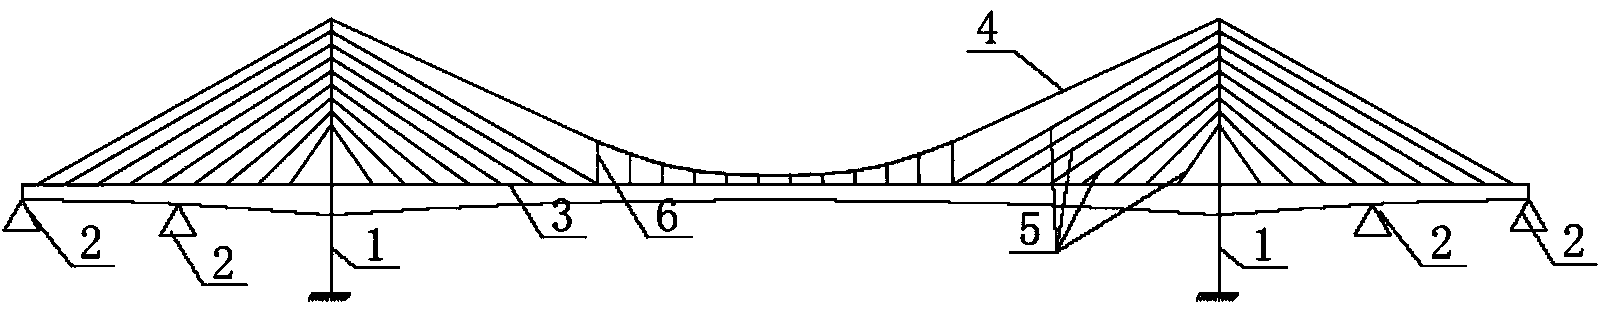 Self-anchoring suspension cable and stay cable cooperative system bridge with girder having variable cross-section